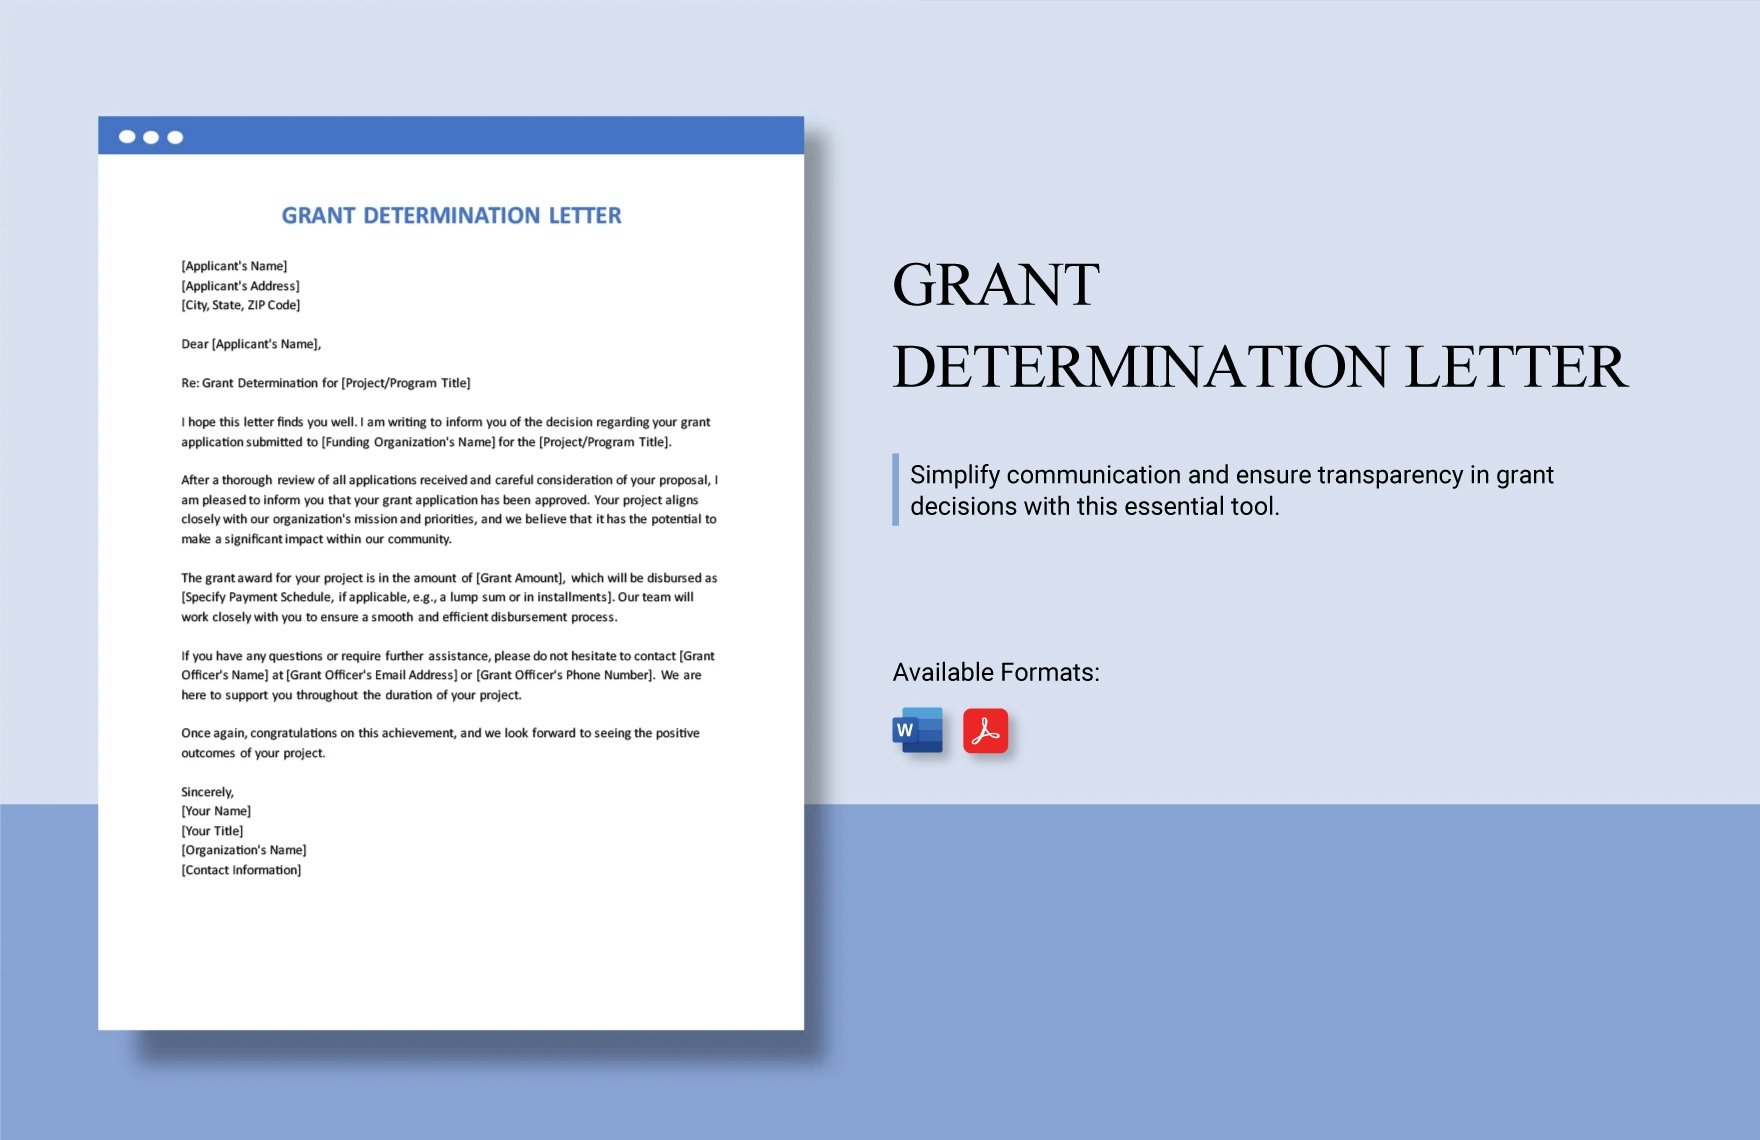 Grant Determination Letter in Word, PDF